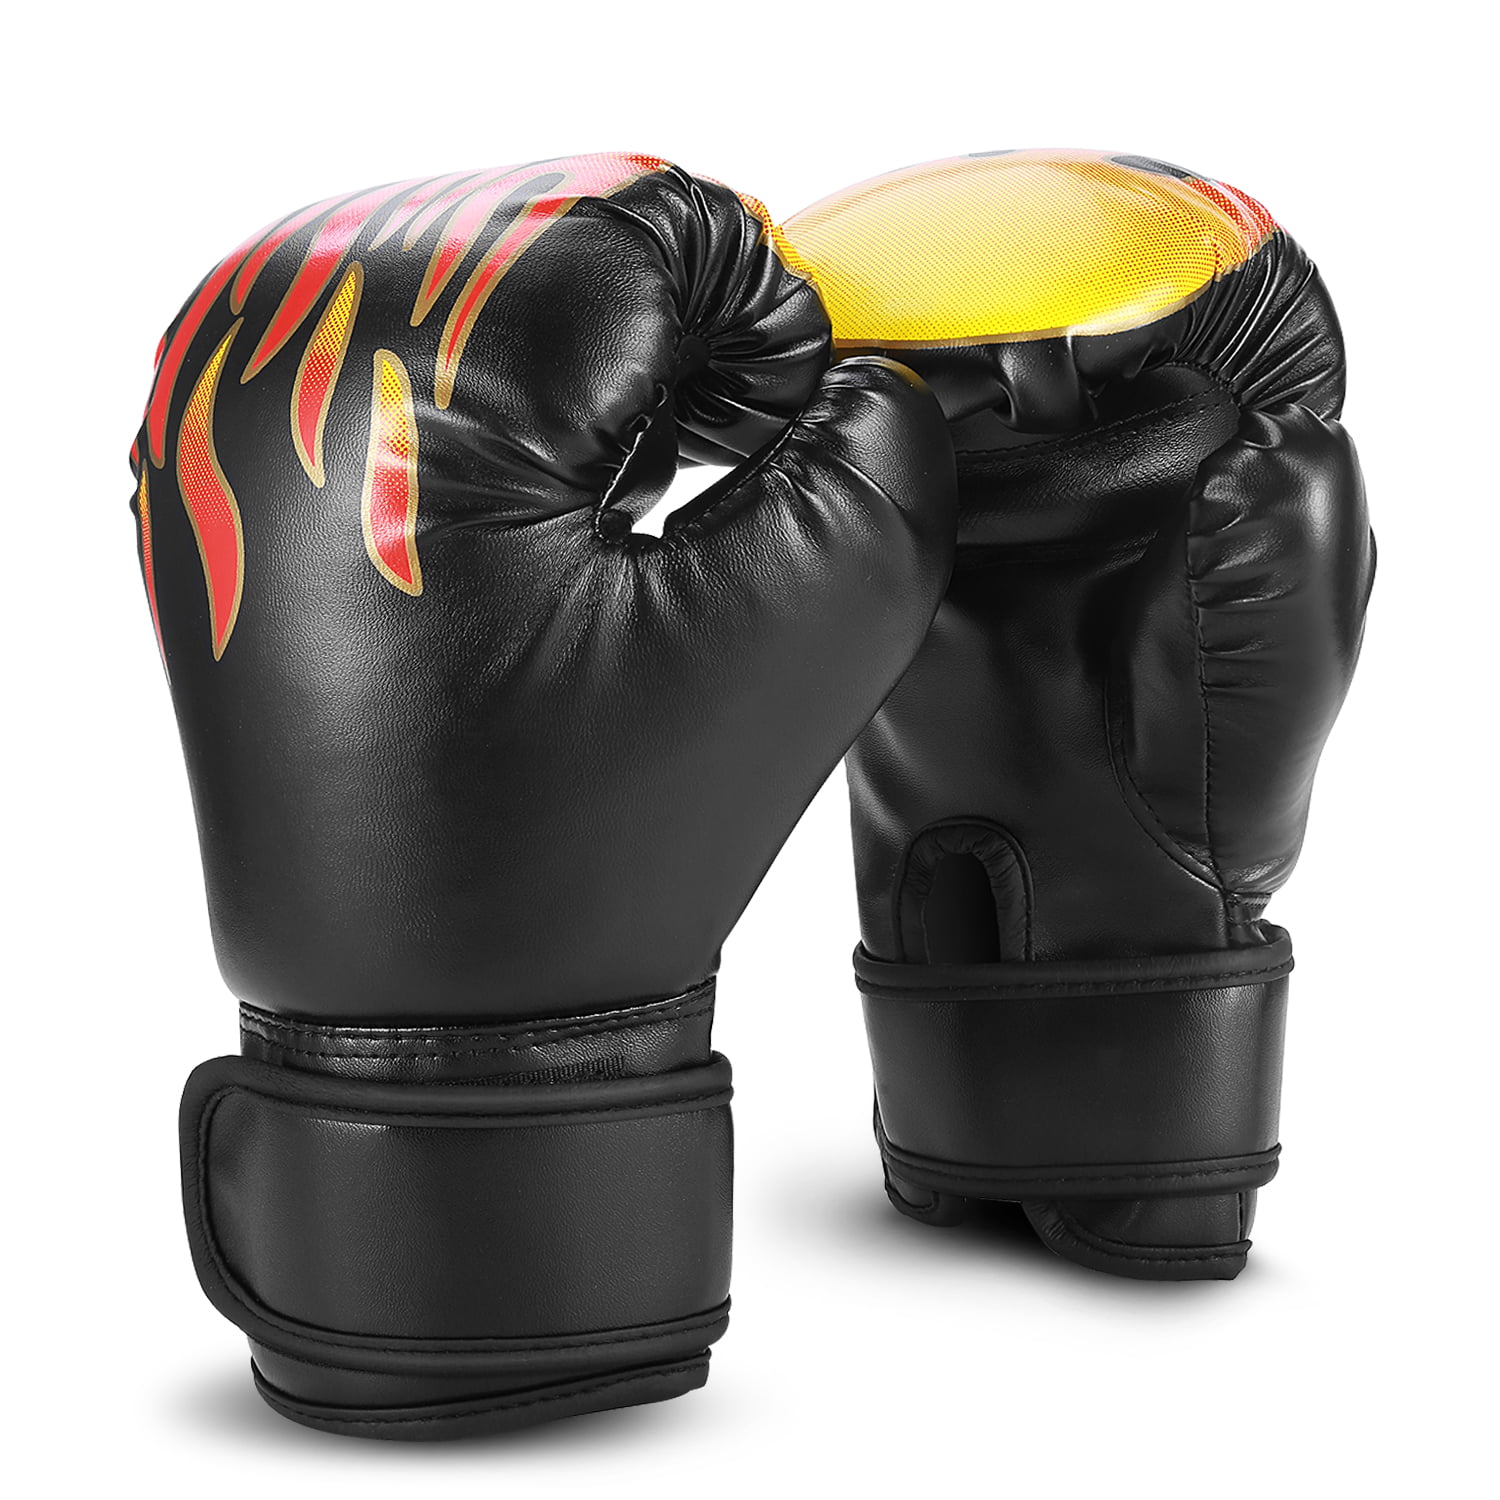 Punch Bag Boxing Gloves for Sparring Martial Arts Training Fingerless Glove New 